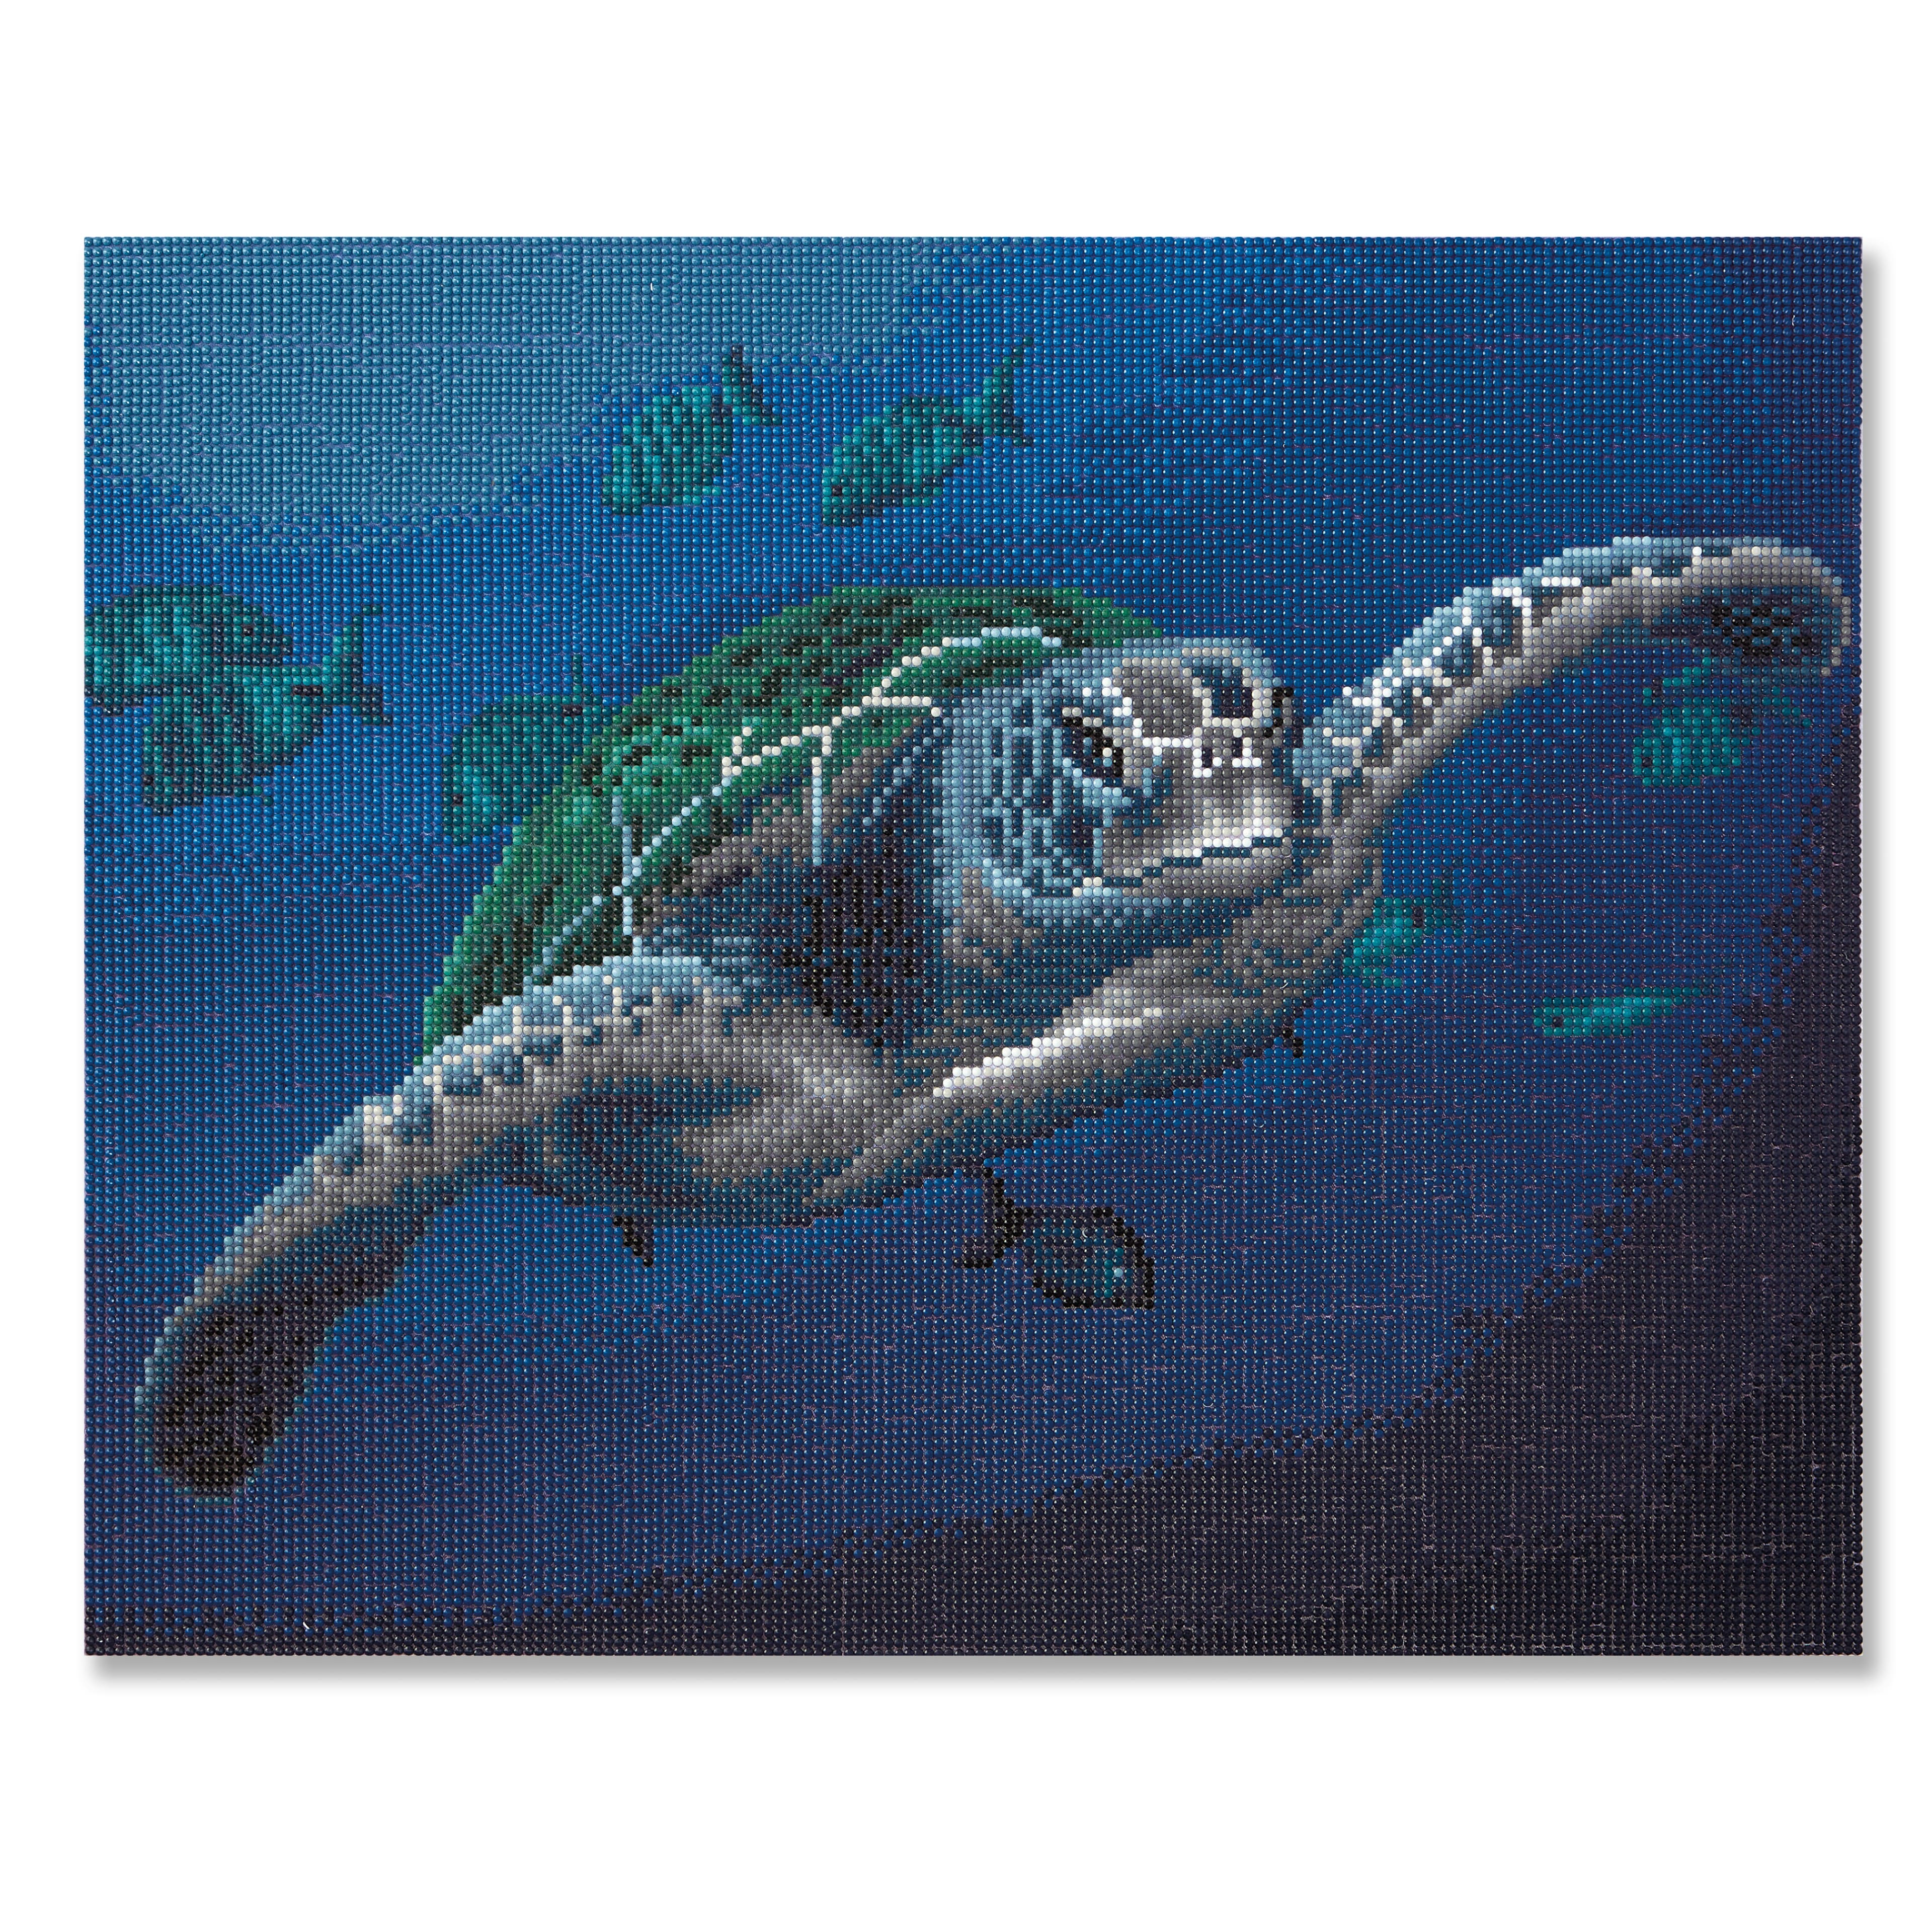 5D Diamond Painting Kits for Adults - Sea Turtle Diamond Art Kits, DIY Full  Drill Crystal Gem Arts and Crafts - Ideal for Home Recreation and Wall  Decor (11.8x15.7 Inches) 